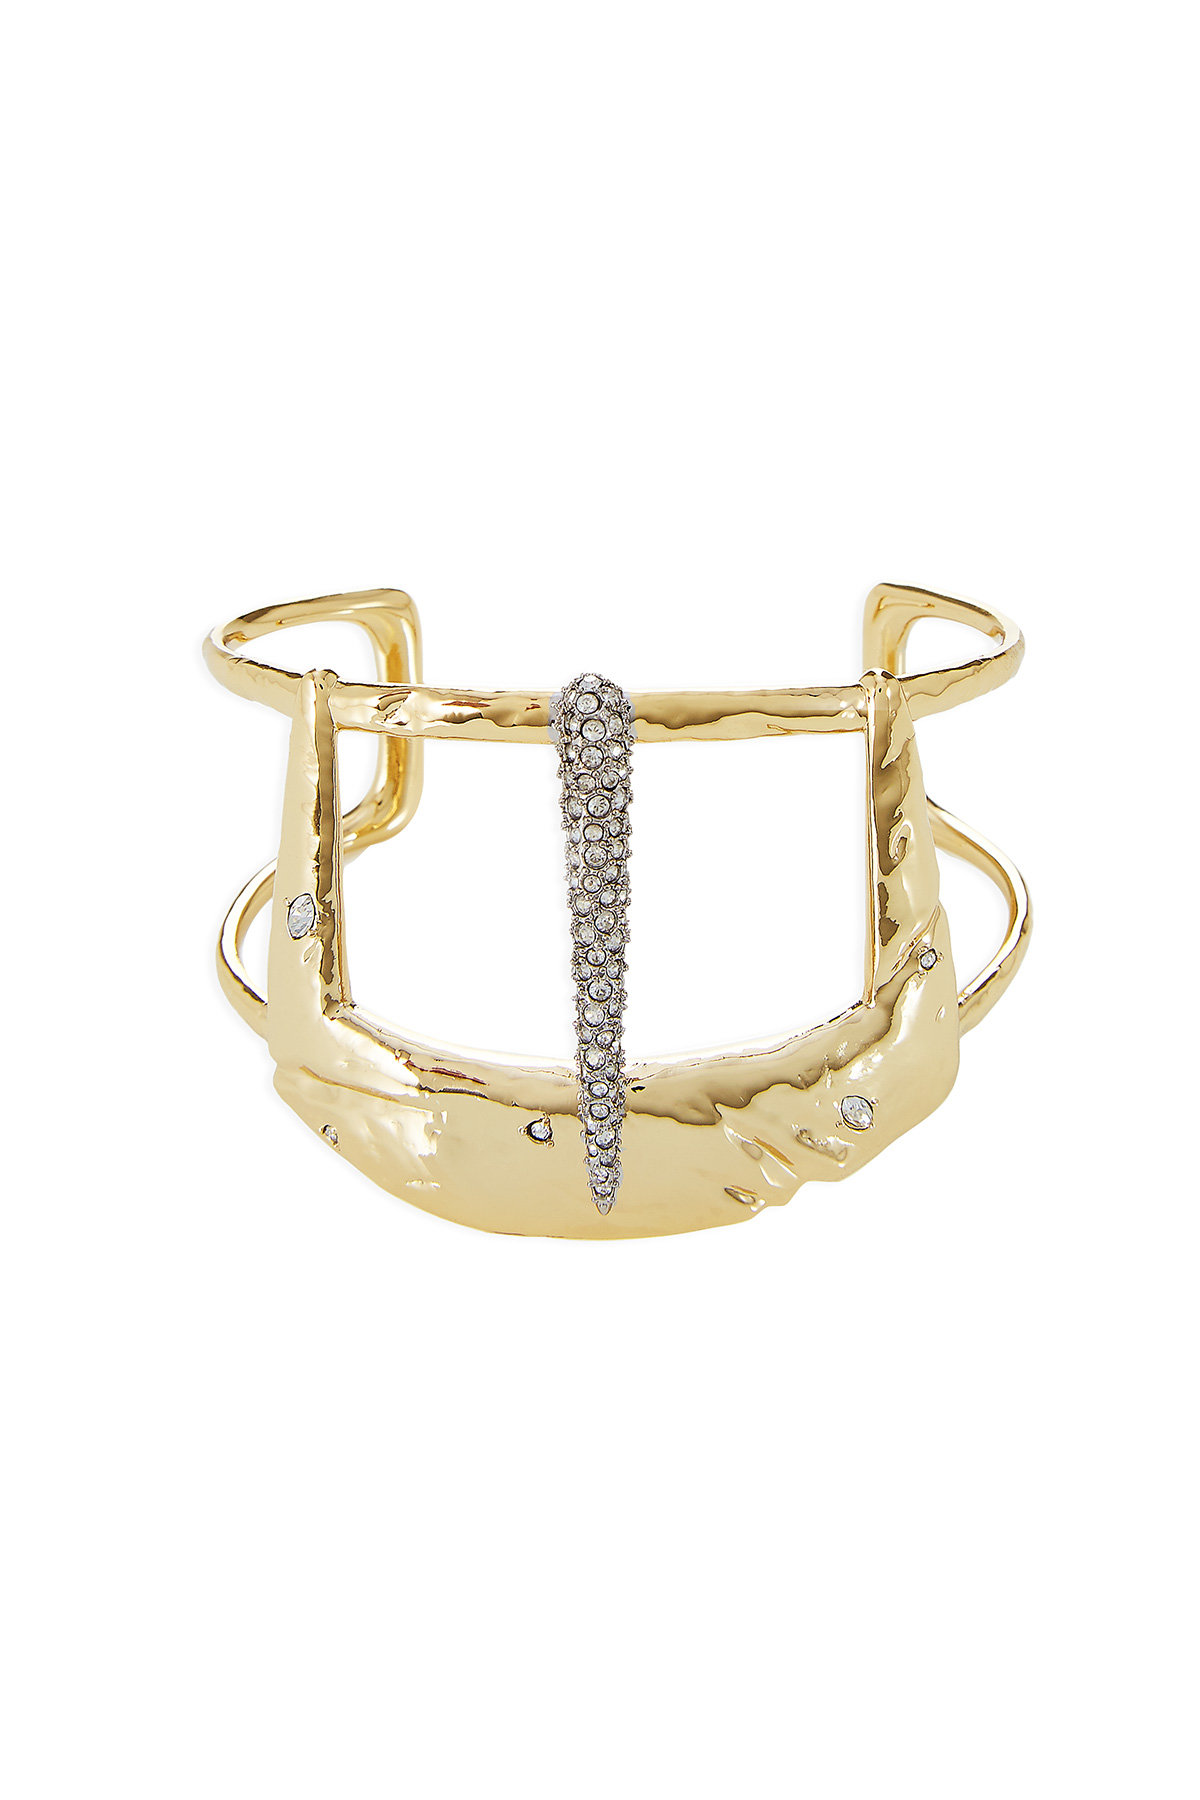 Alexis Bittar - 10kt Gold Cuff Bracelet with Crystals